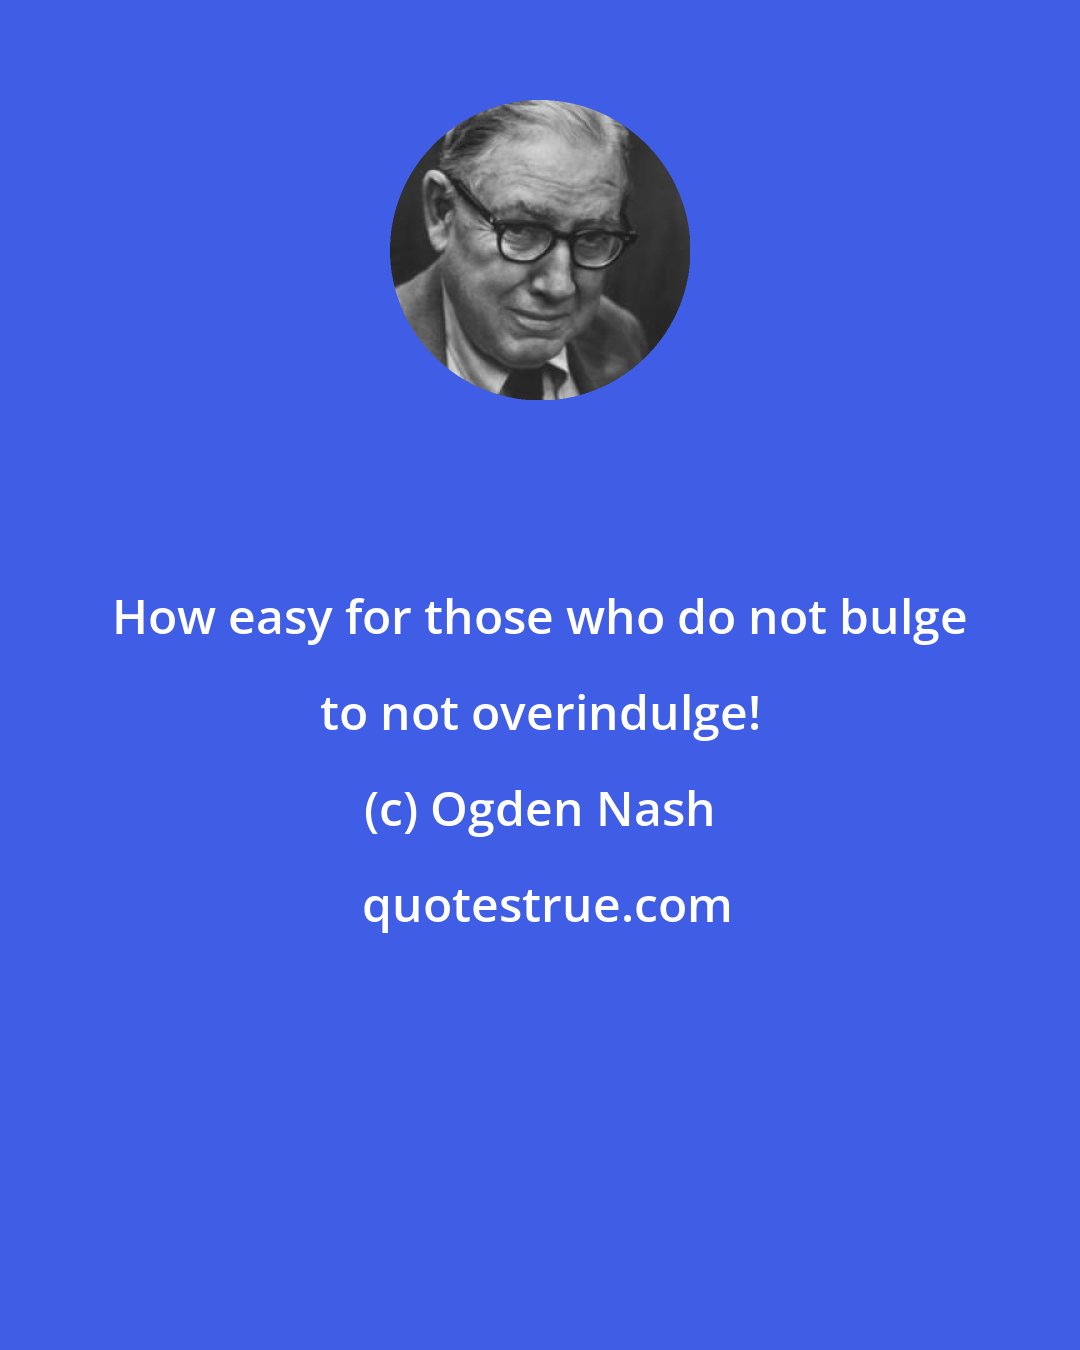 Ogden Nash: How easy for those who do not bulge to not overindulge!